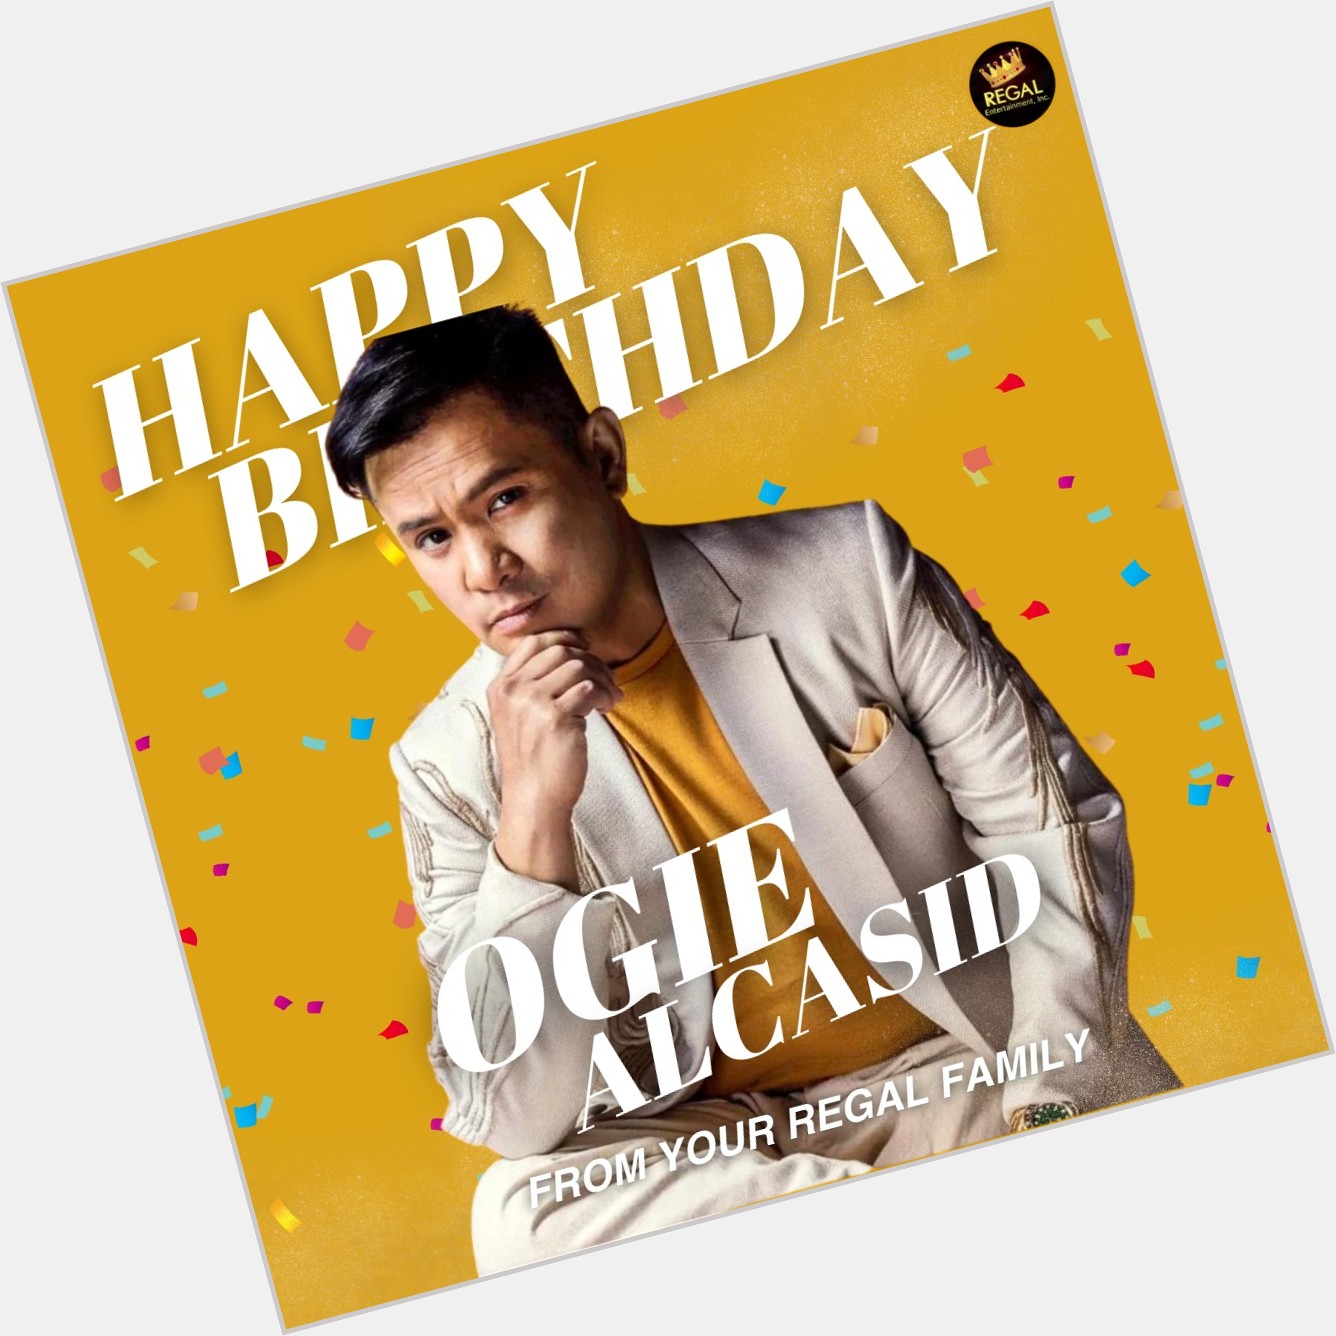 Happy Birthday Ogie Alcasid! We wish you all the best in life! From your Regal Family!  